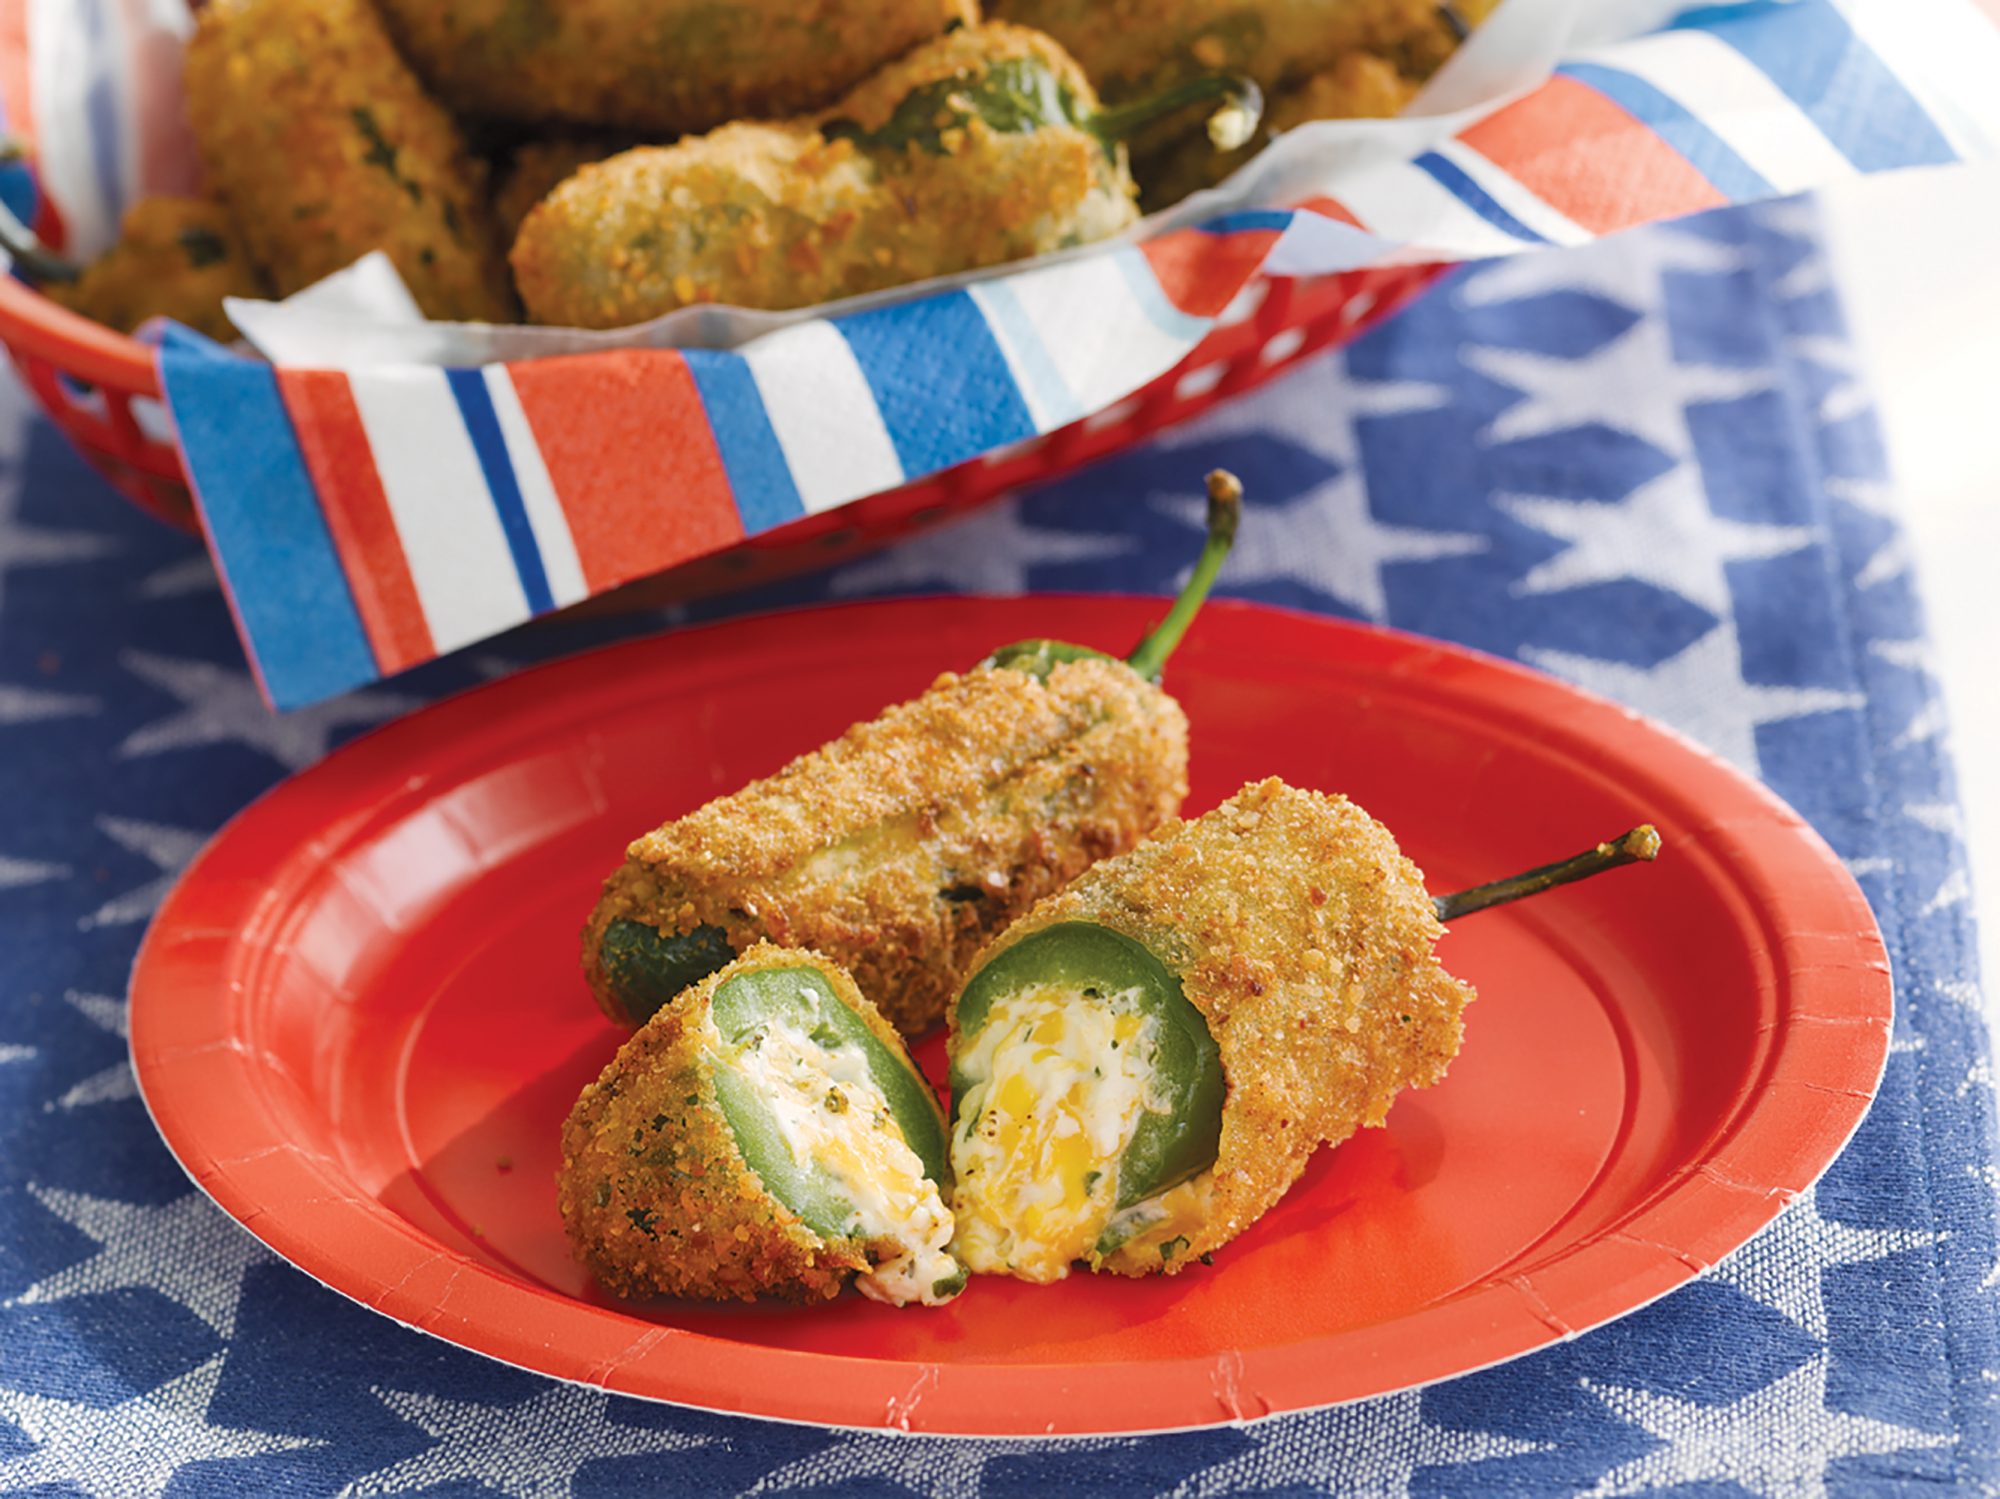 7 Jalapeño Poppers to Get Your Next Party Started